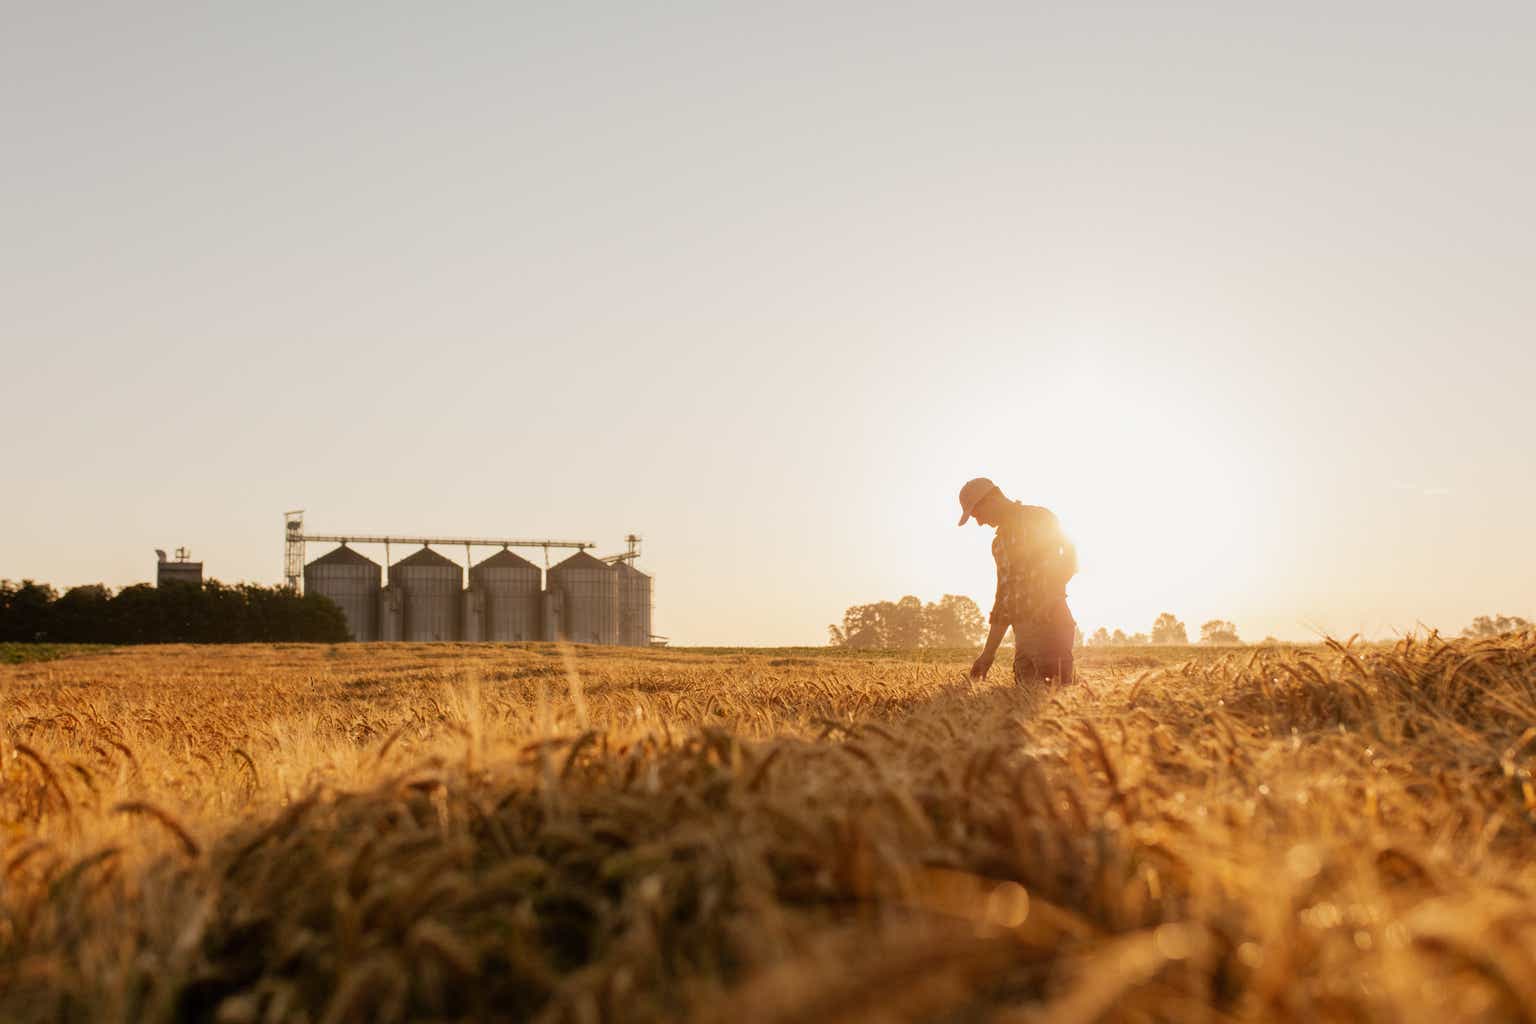 Silhouette of man examining wheat crops on field